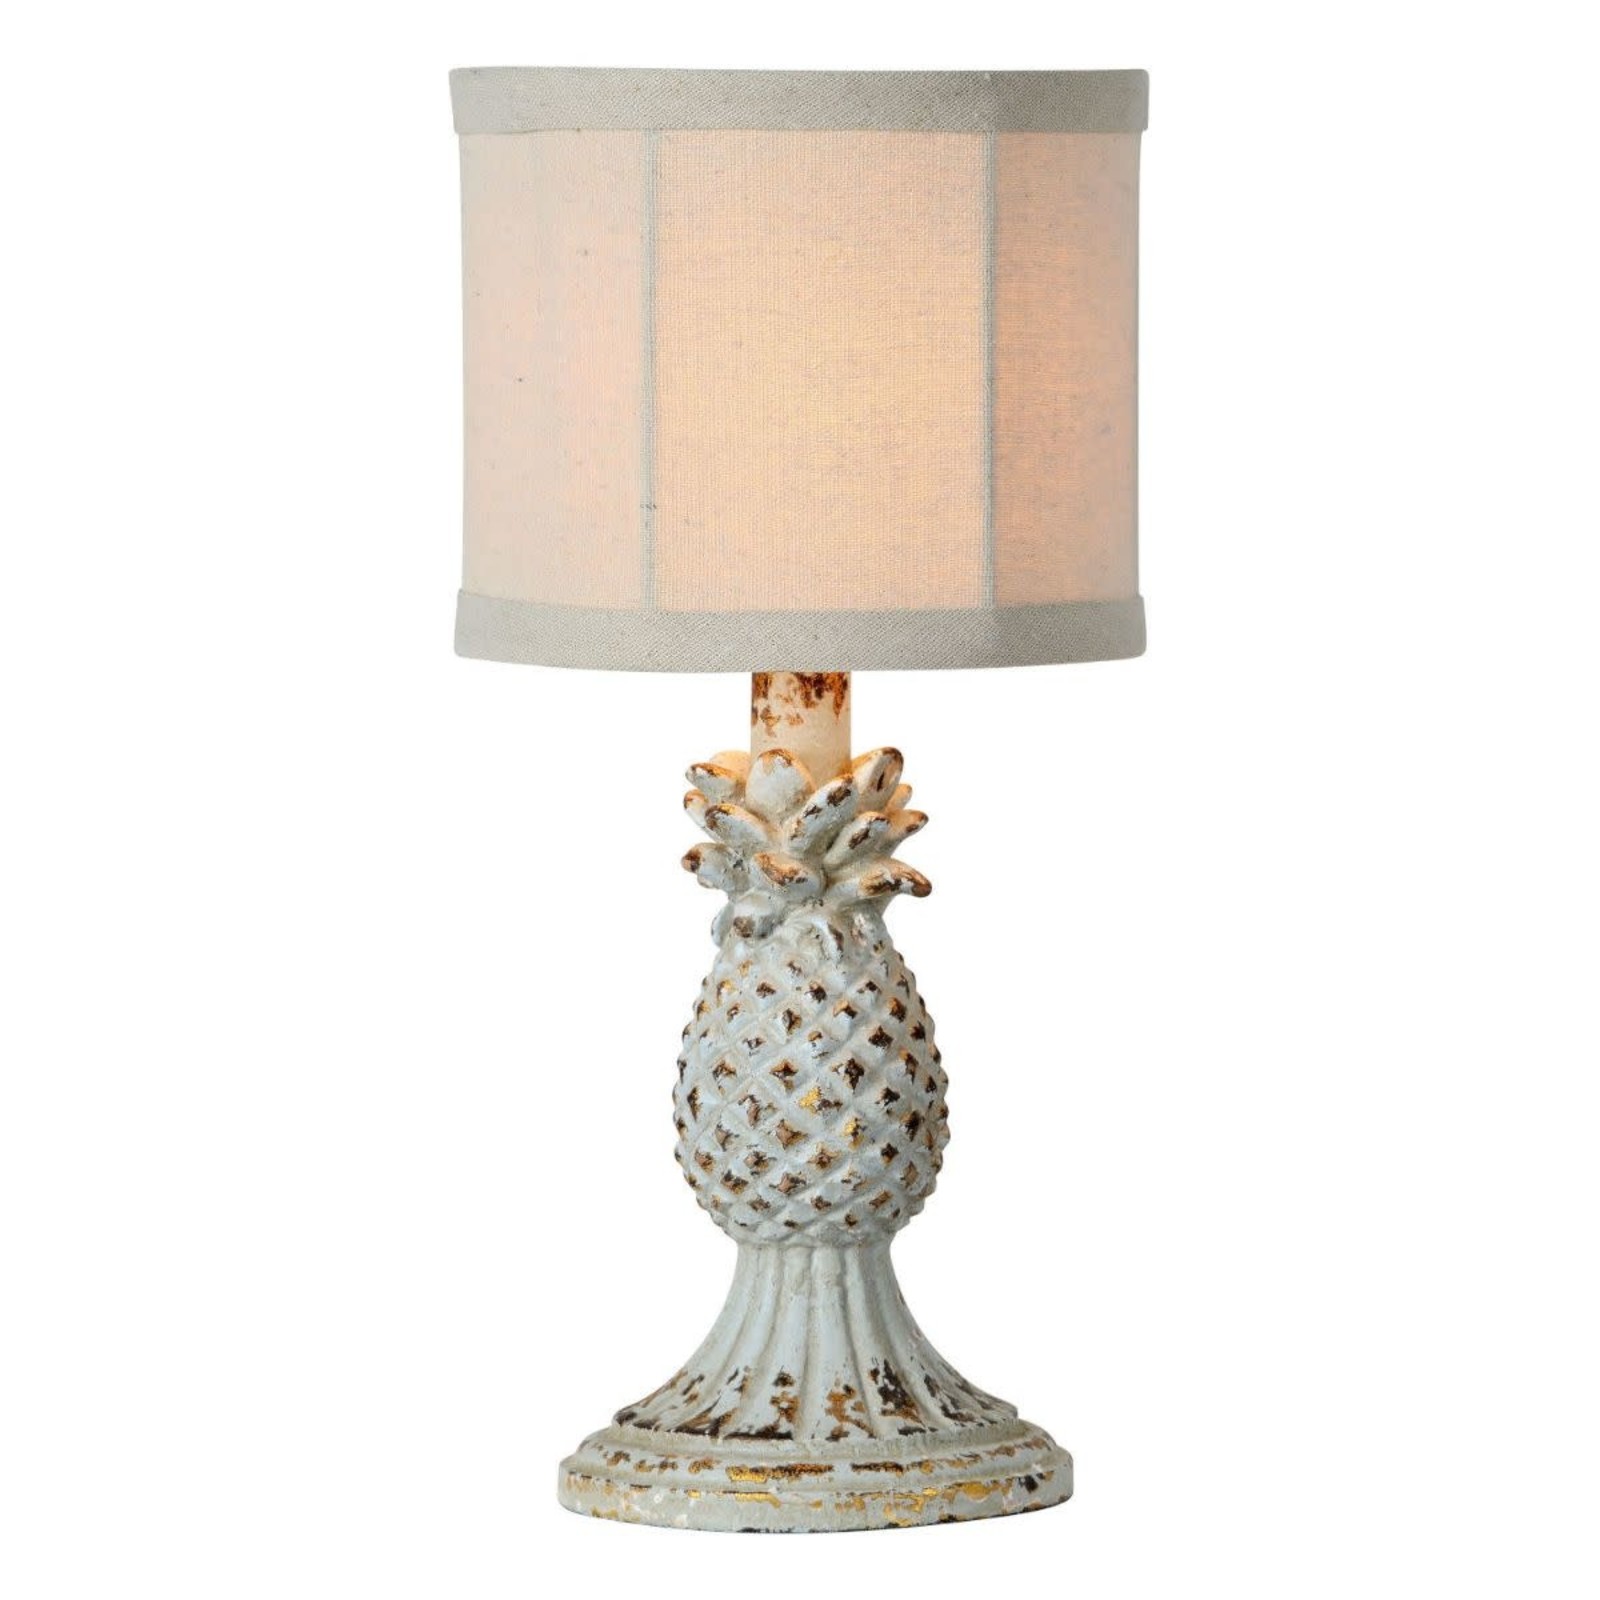 Forty West MCGREGOR TABLE LAMP   70908 loading=